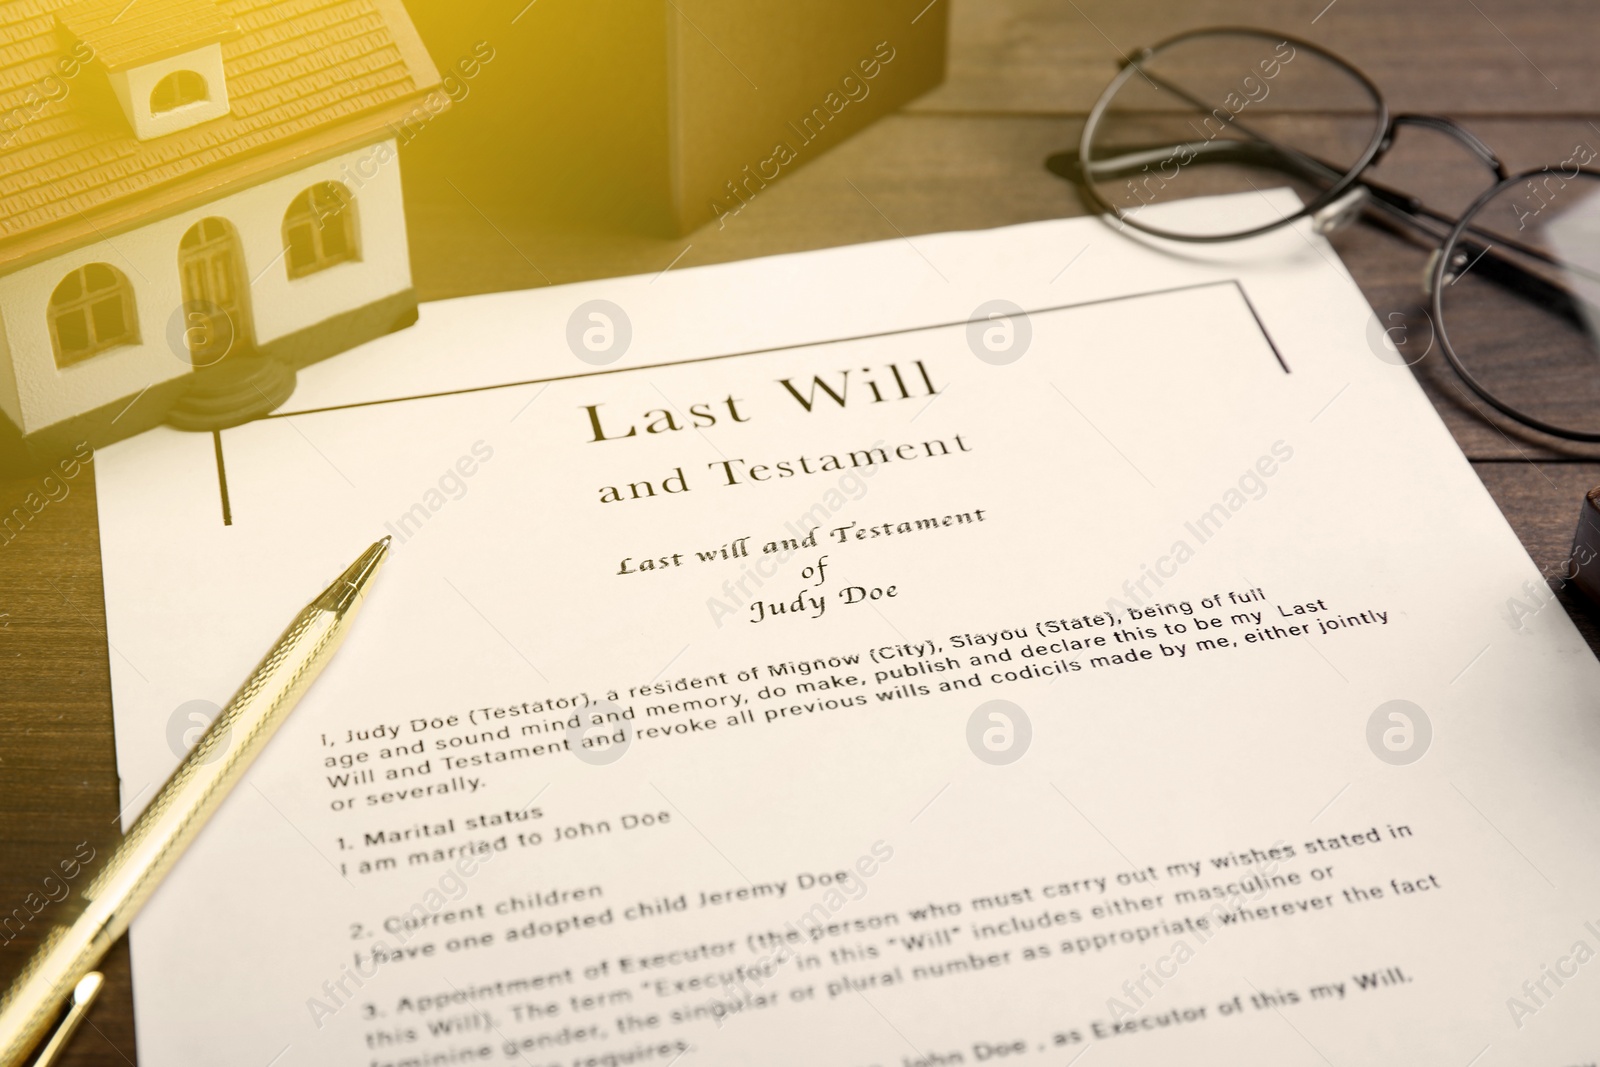 Image of Last Will and Testament, house model, glasses and pen on table, closeup